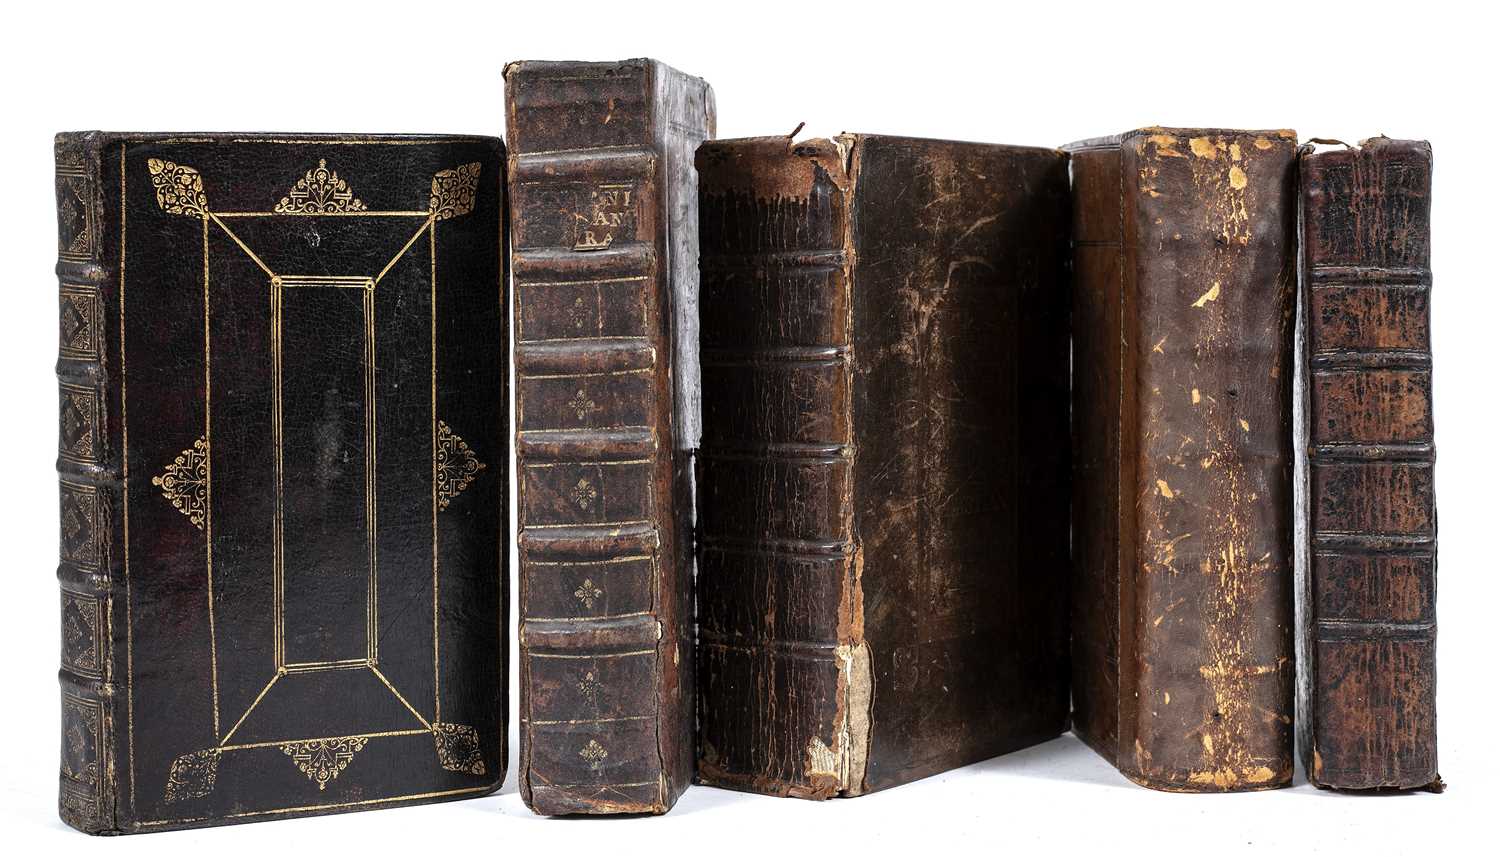 An 18th century Psalter in English and French. Baskett, Oxford 1717. 8vo. Gilt tooled calf. A